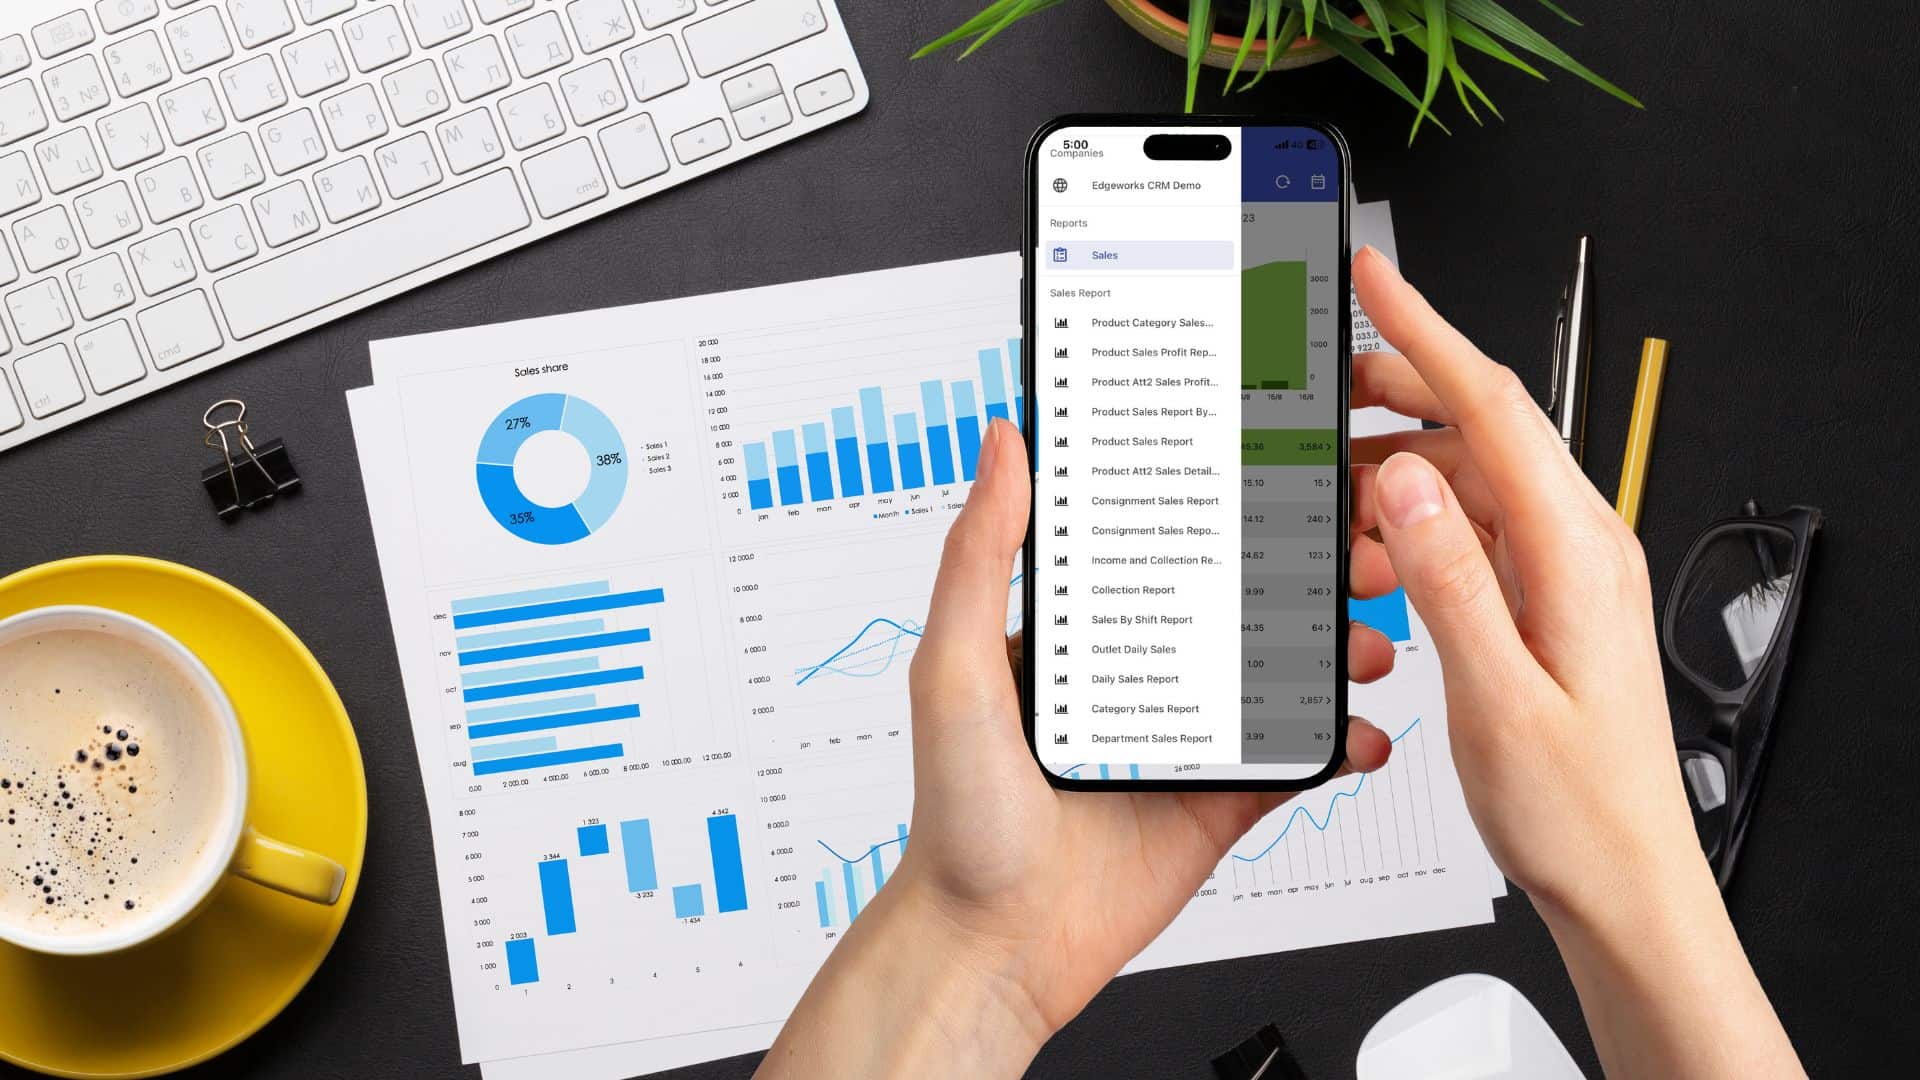 A person accessing business reports on a mobile device while on the move. Seamlessly stay connected to Edgeworks Solutions' business insights - View reports on the go.